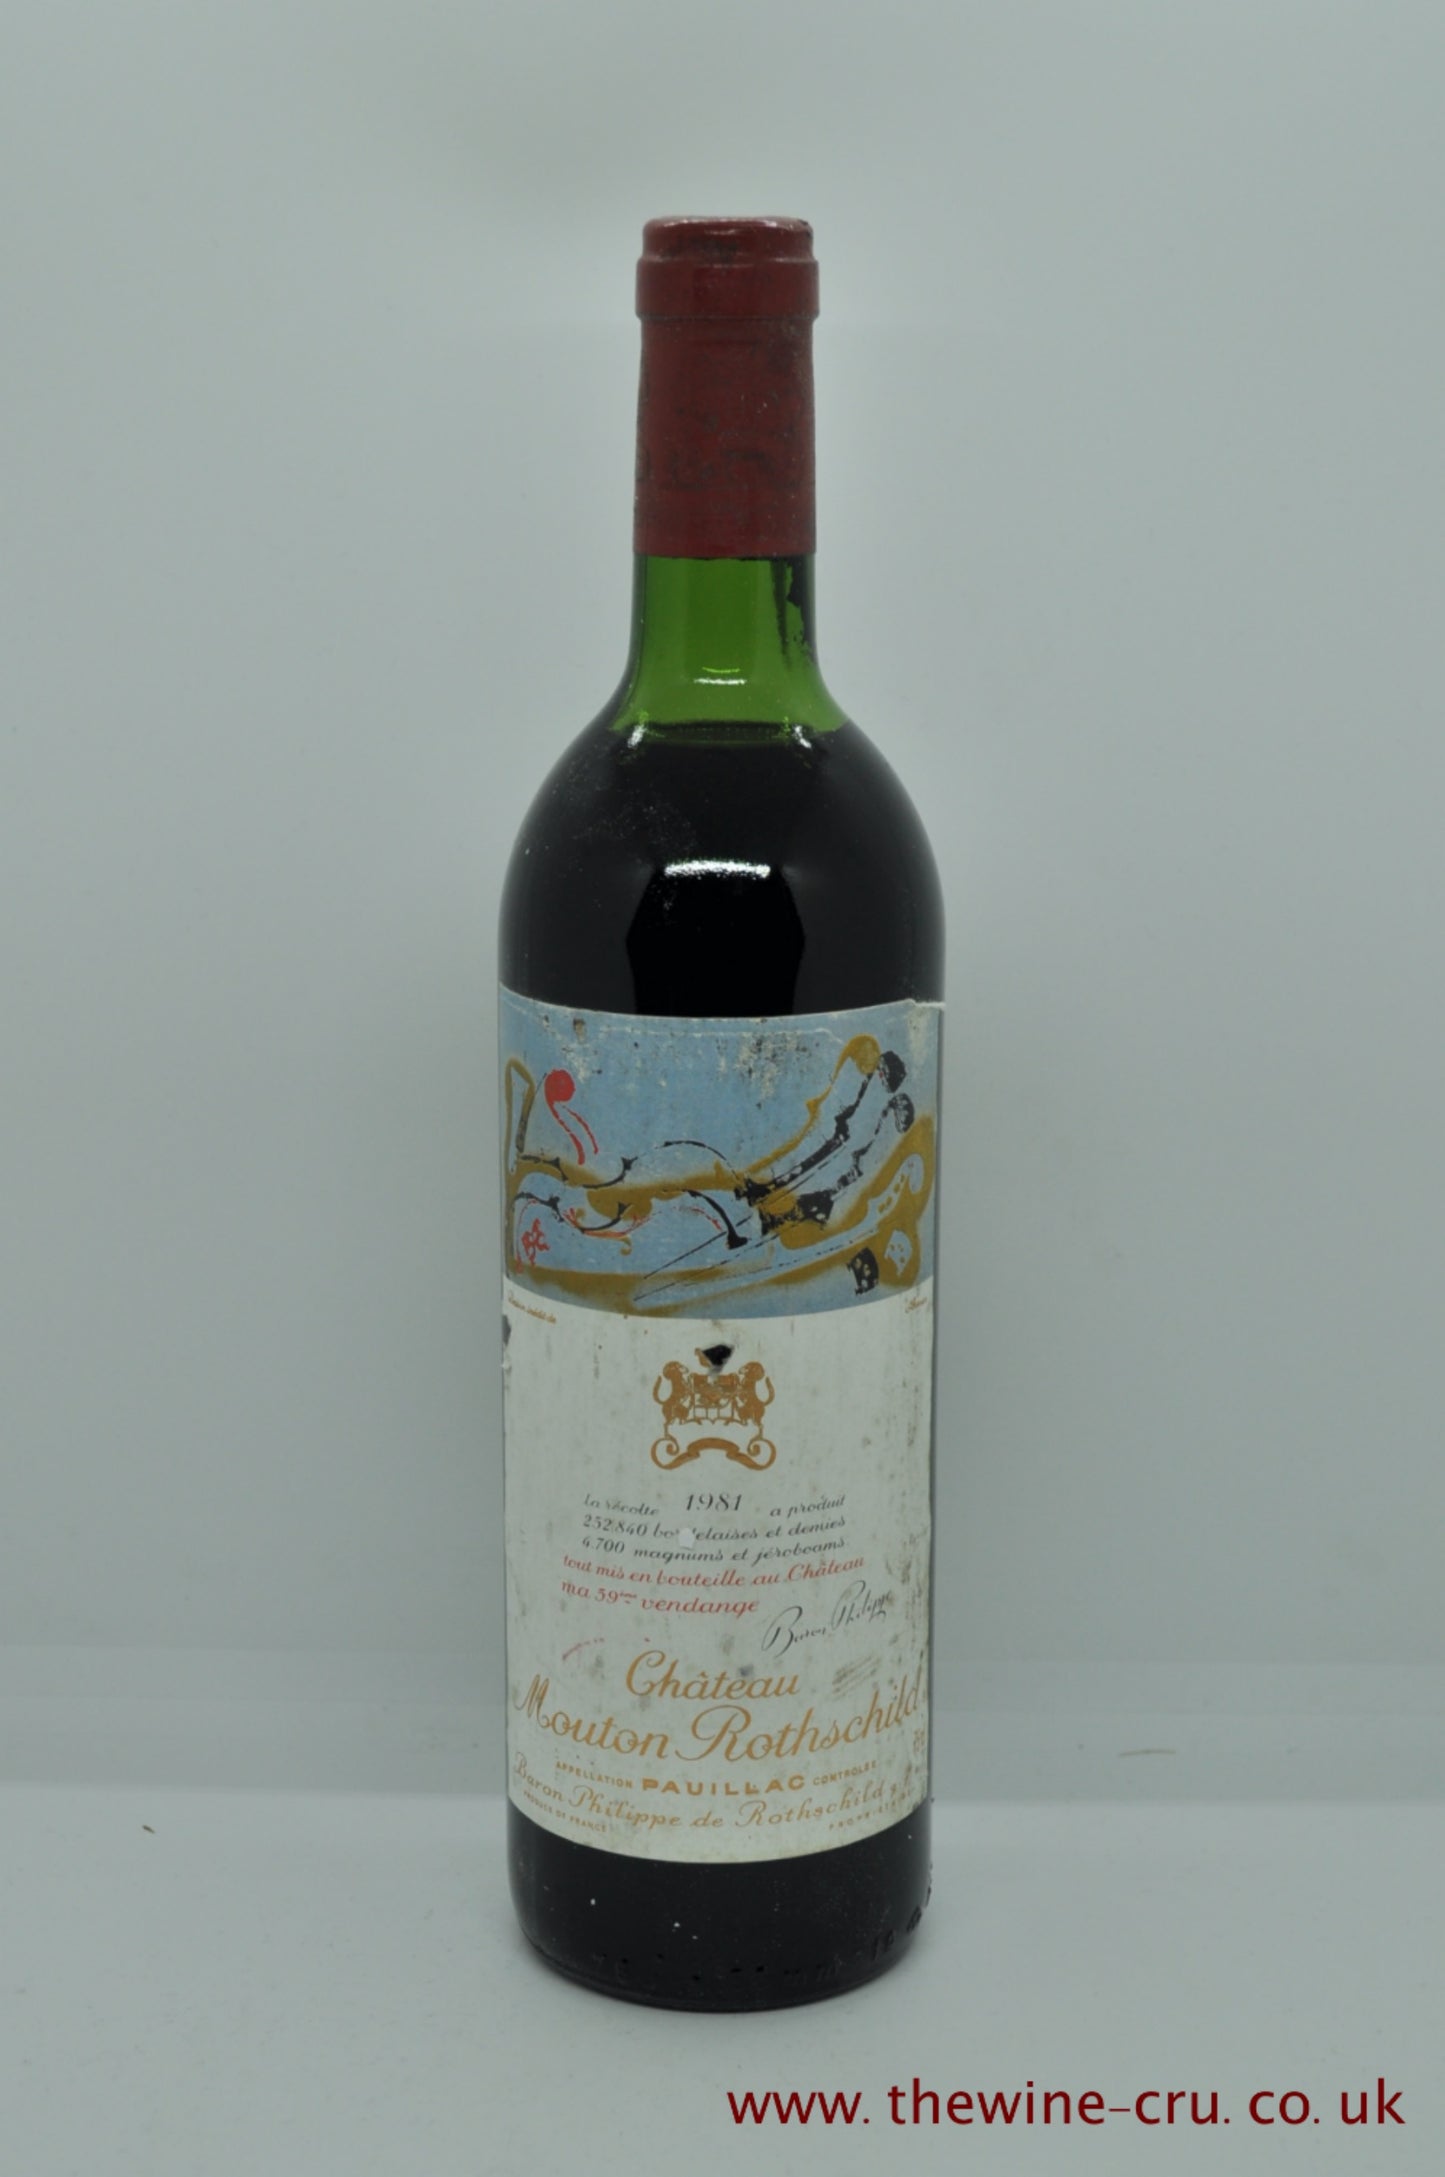 1981 vintage red wine. Chateau Mouton Rothschild 1981, France, Bordeaux. The bottle is in good condition with the level being top shoulder. Immediate delivery. Free local delivery. Gift wrapping available.